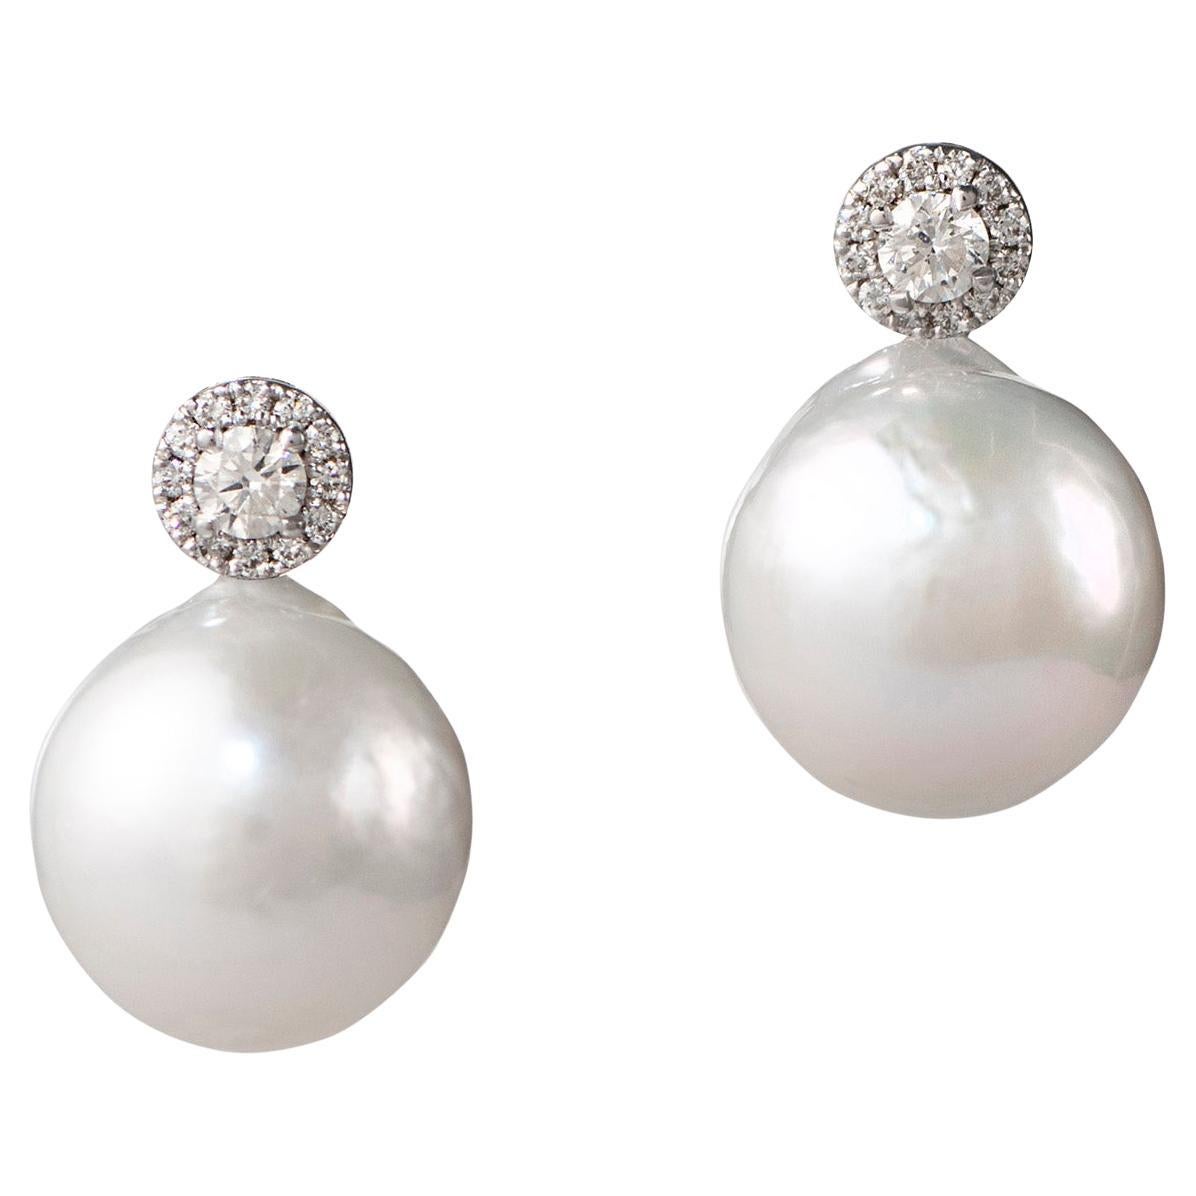 DIAMANT HALO PEARL EARRINGS, BY Michelle Massoura